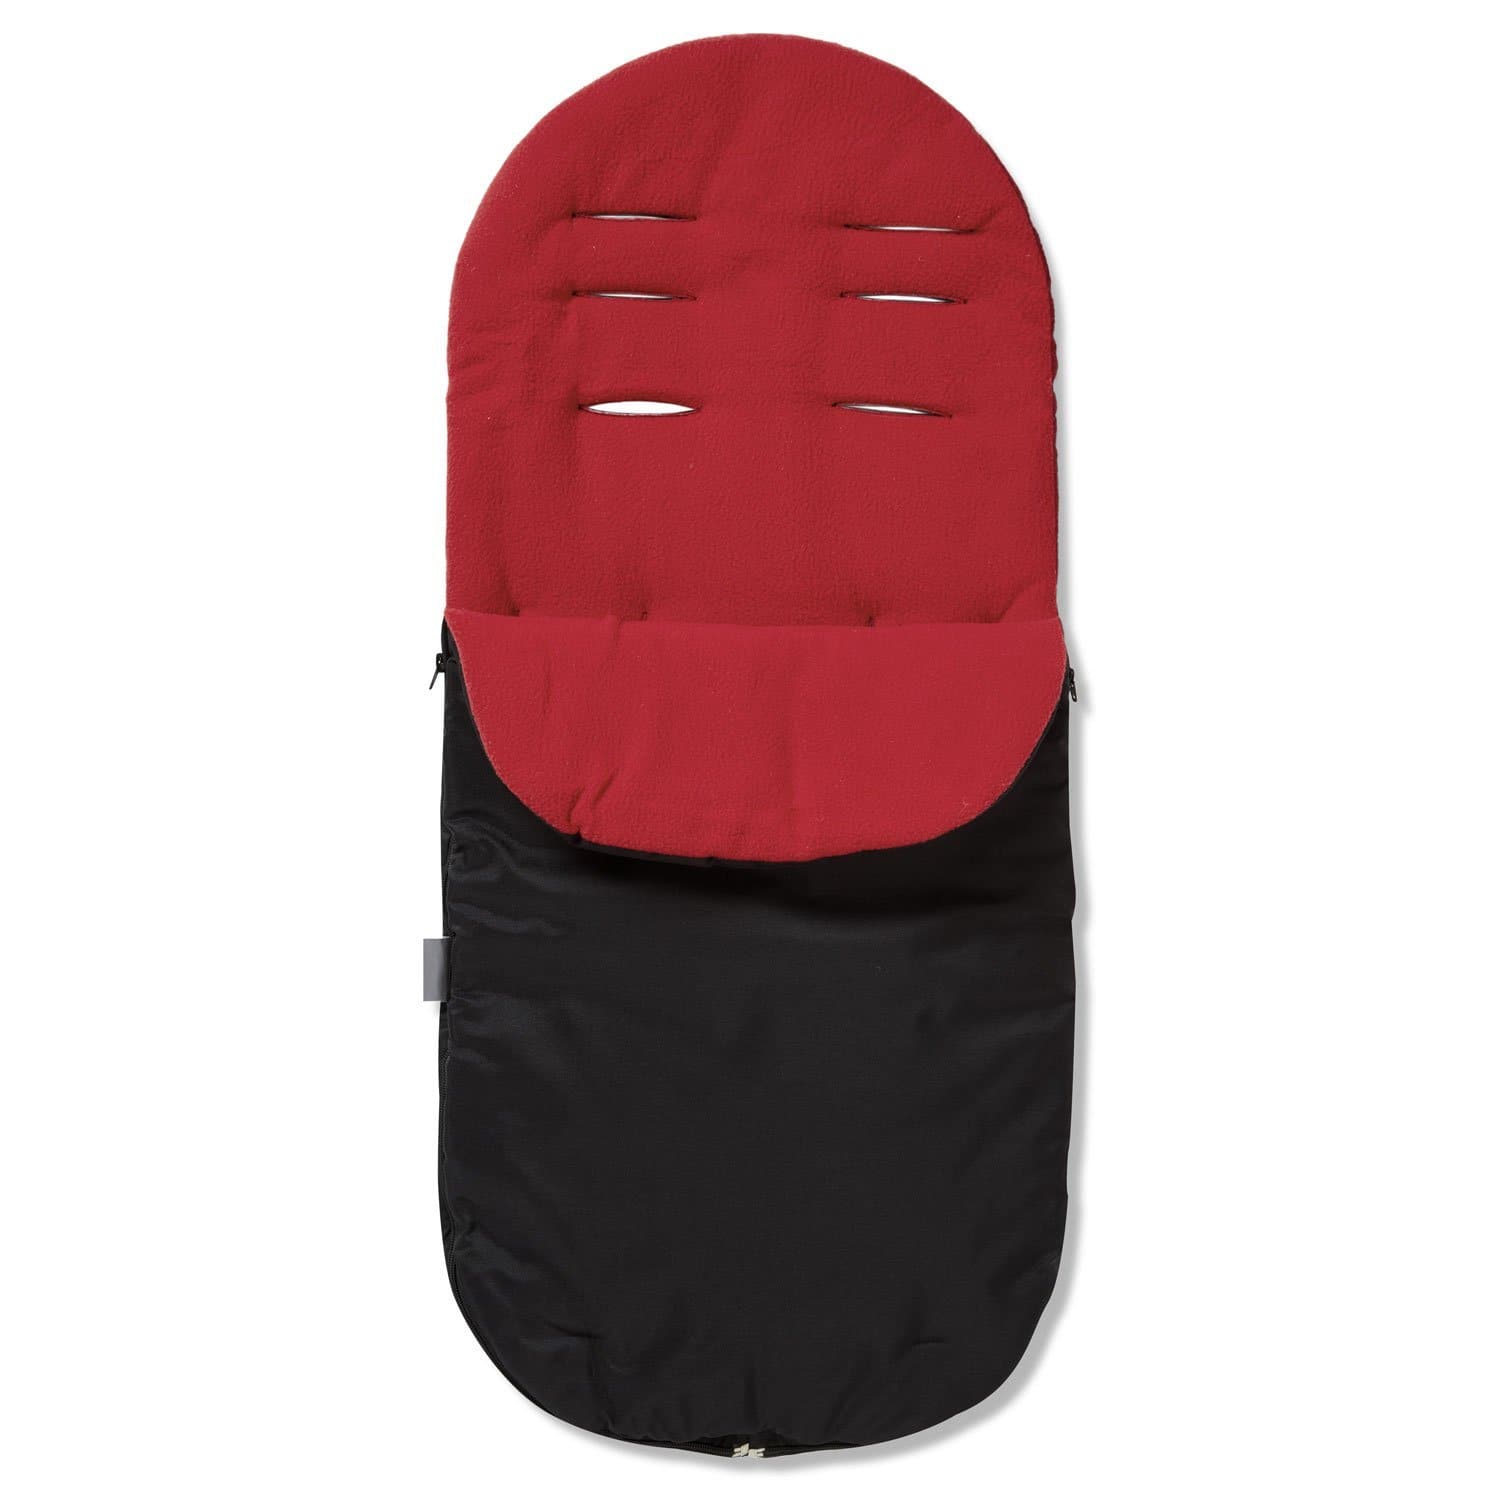 Footmuff / Cosy Toes Compatible with Bebecar - Red / Fits All Models | For Your Little One